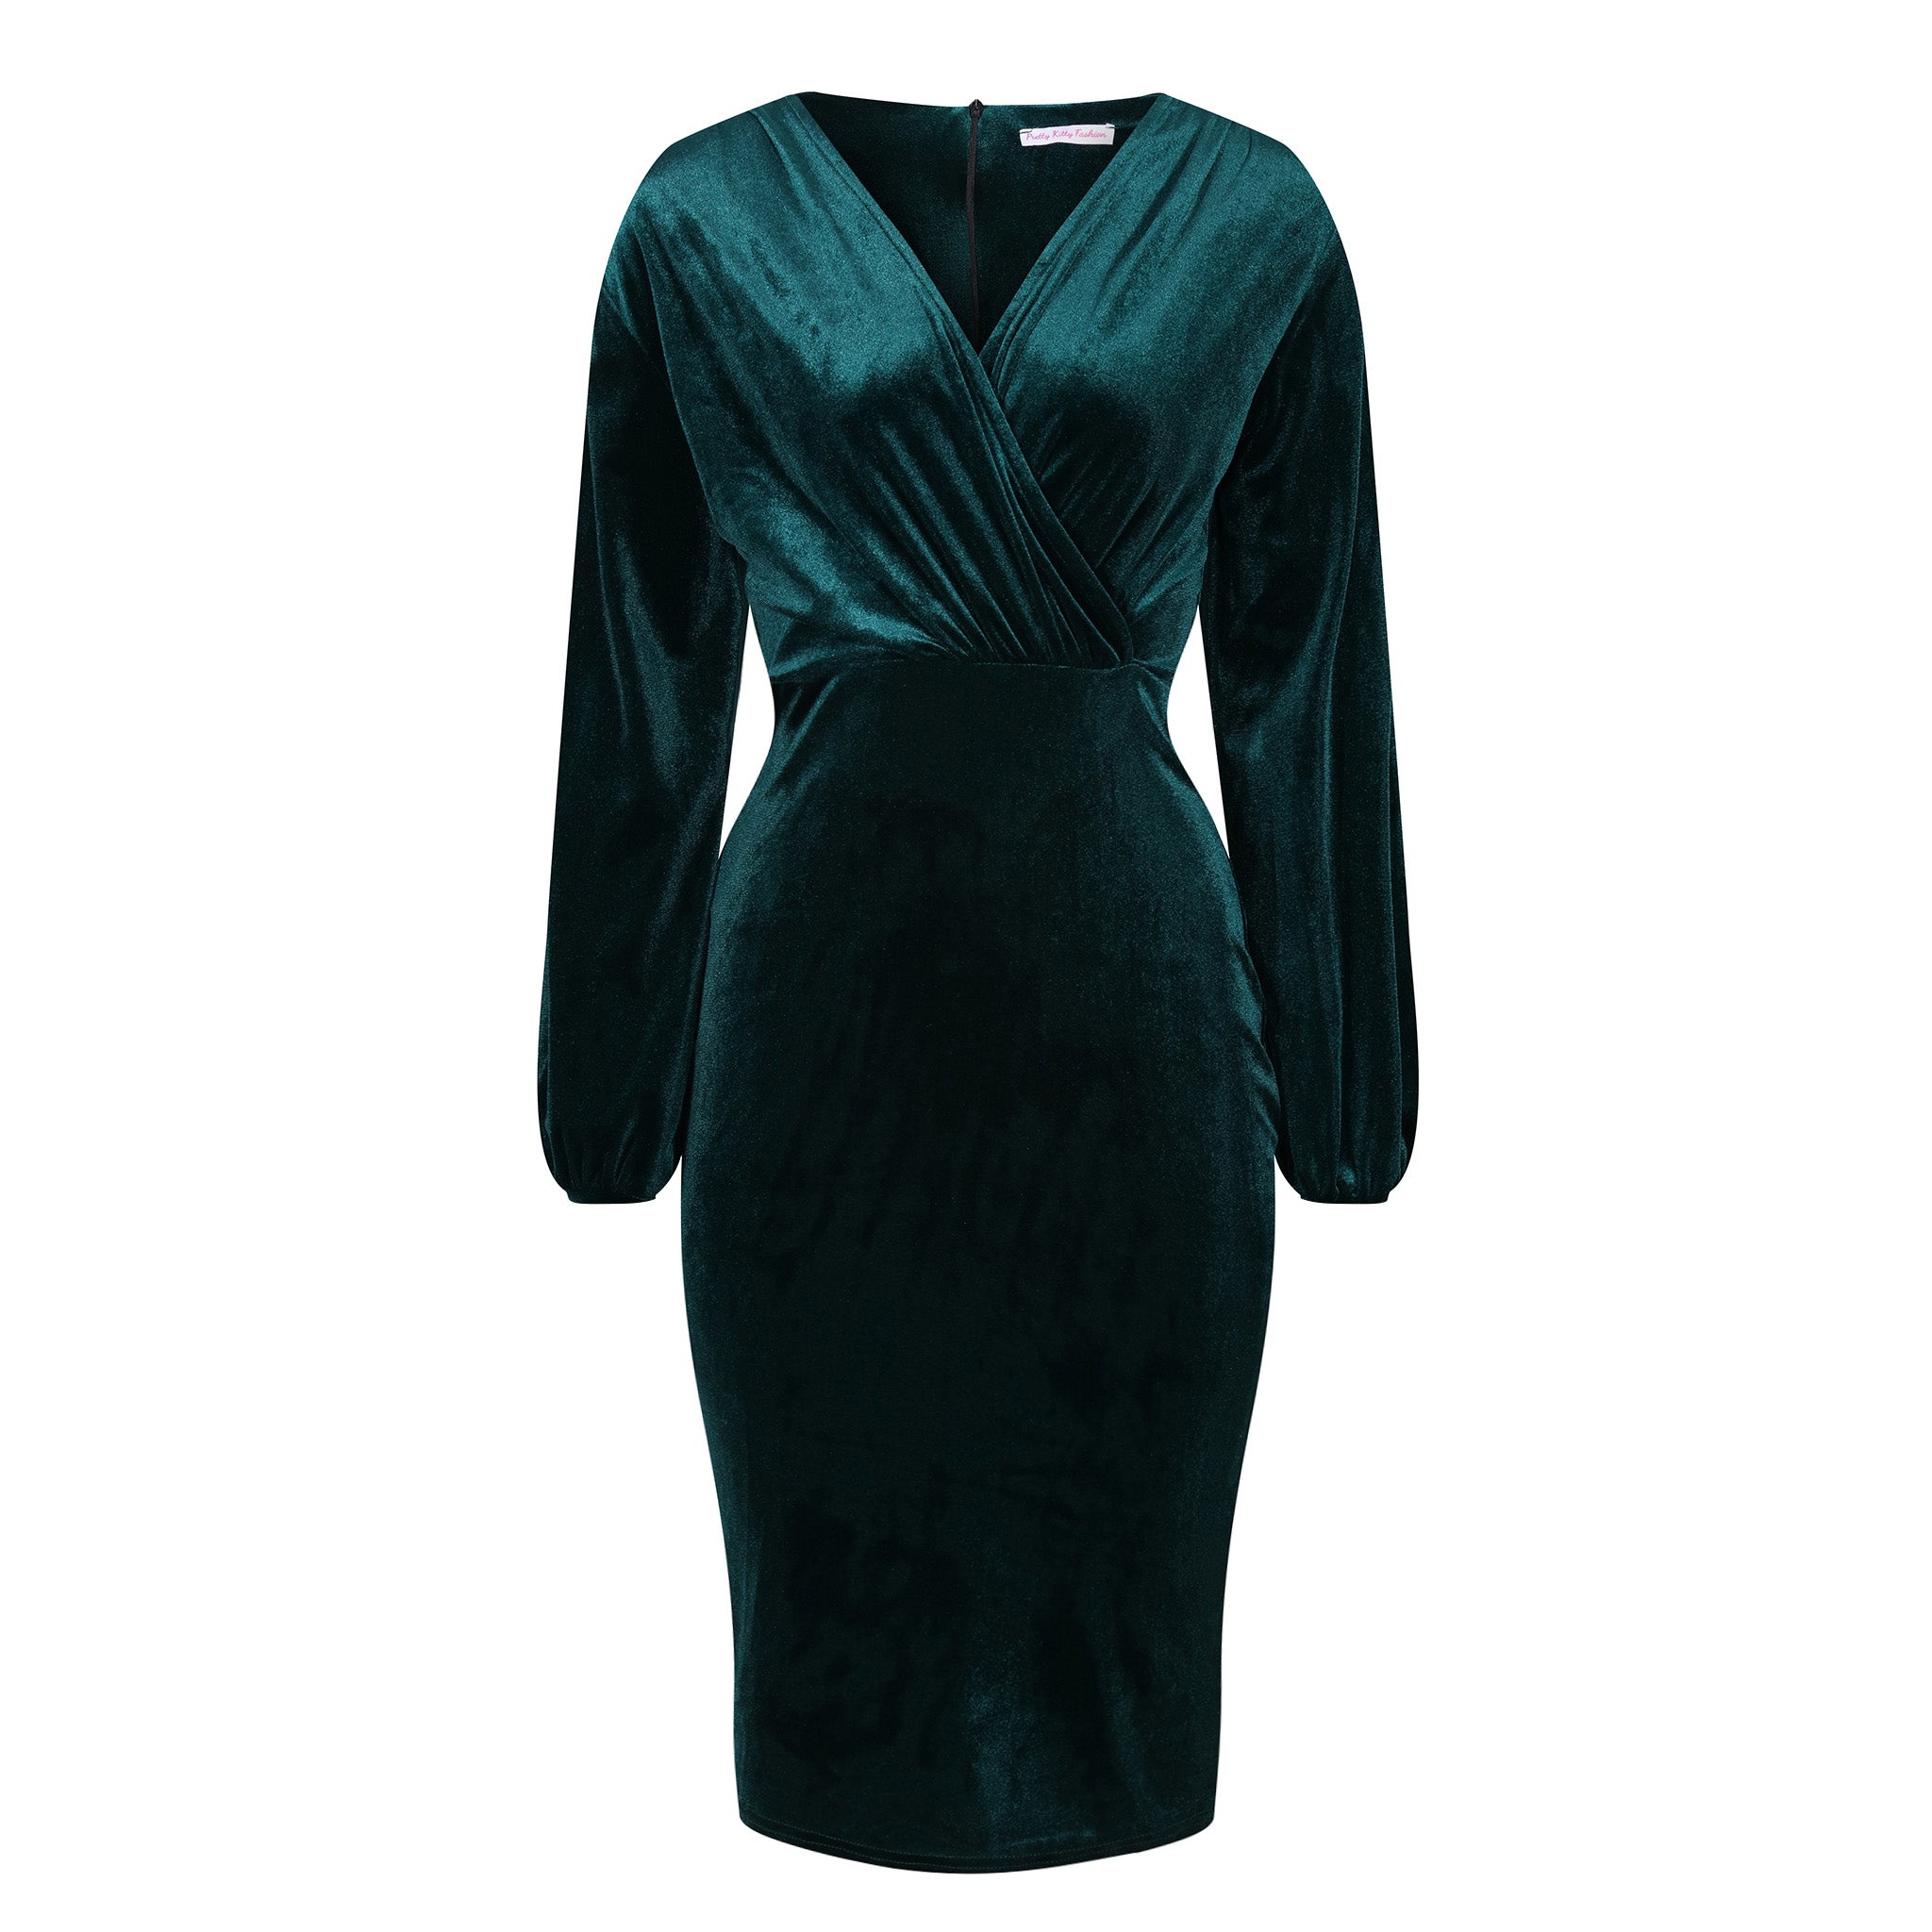 Green Velour Crossover Top Long Sleeve Wiggle Pencil Dress